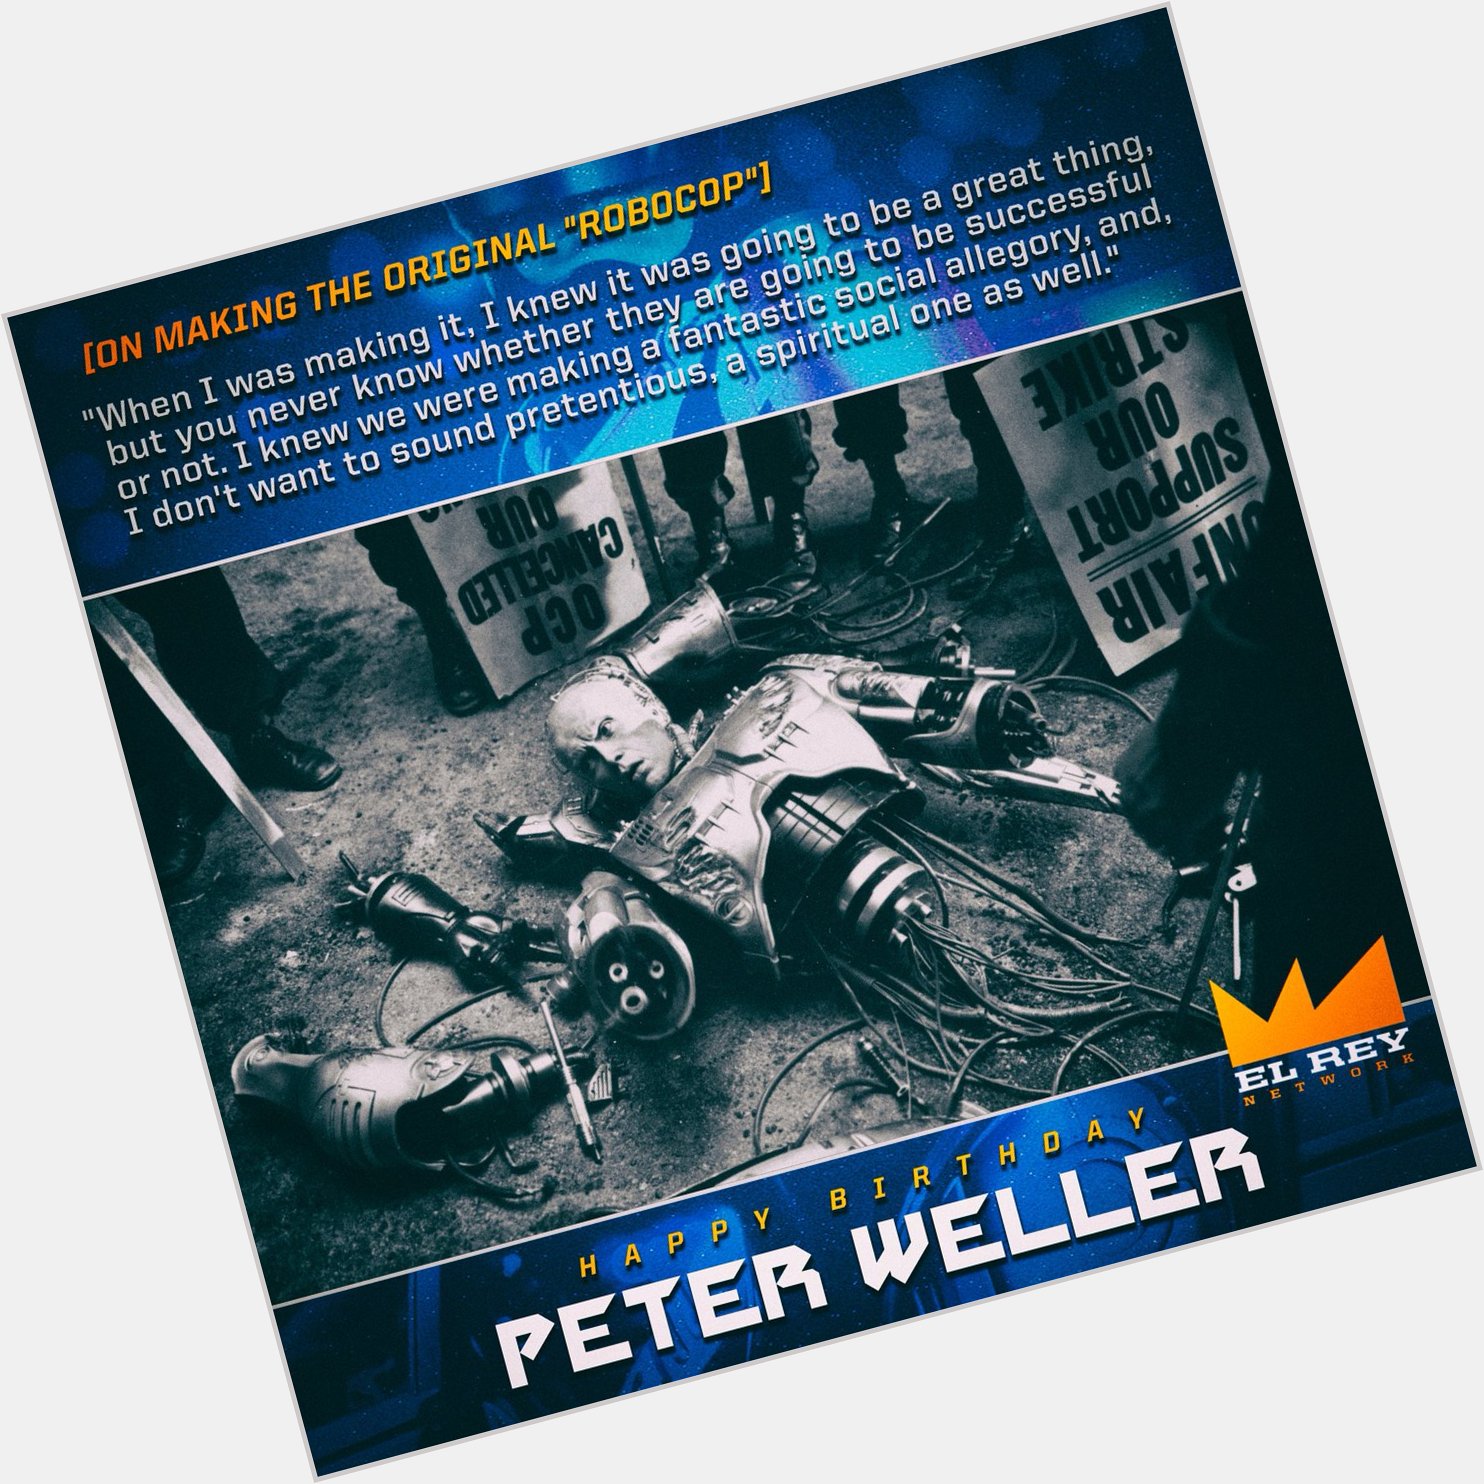 Happy Birthday to Peter Weller from 